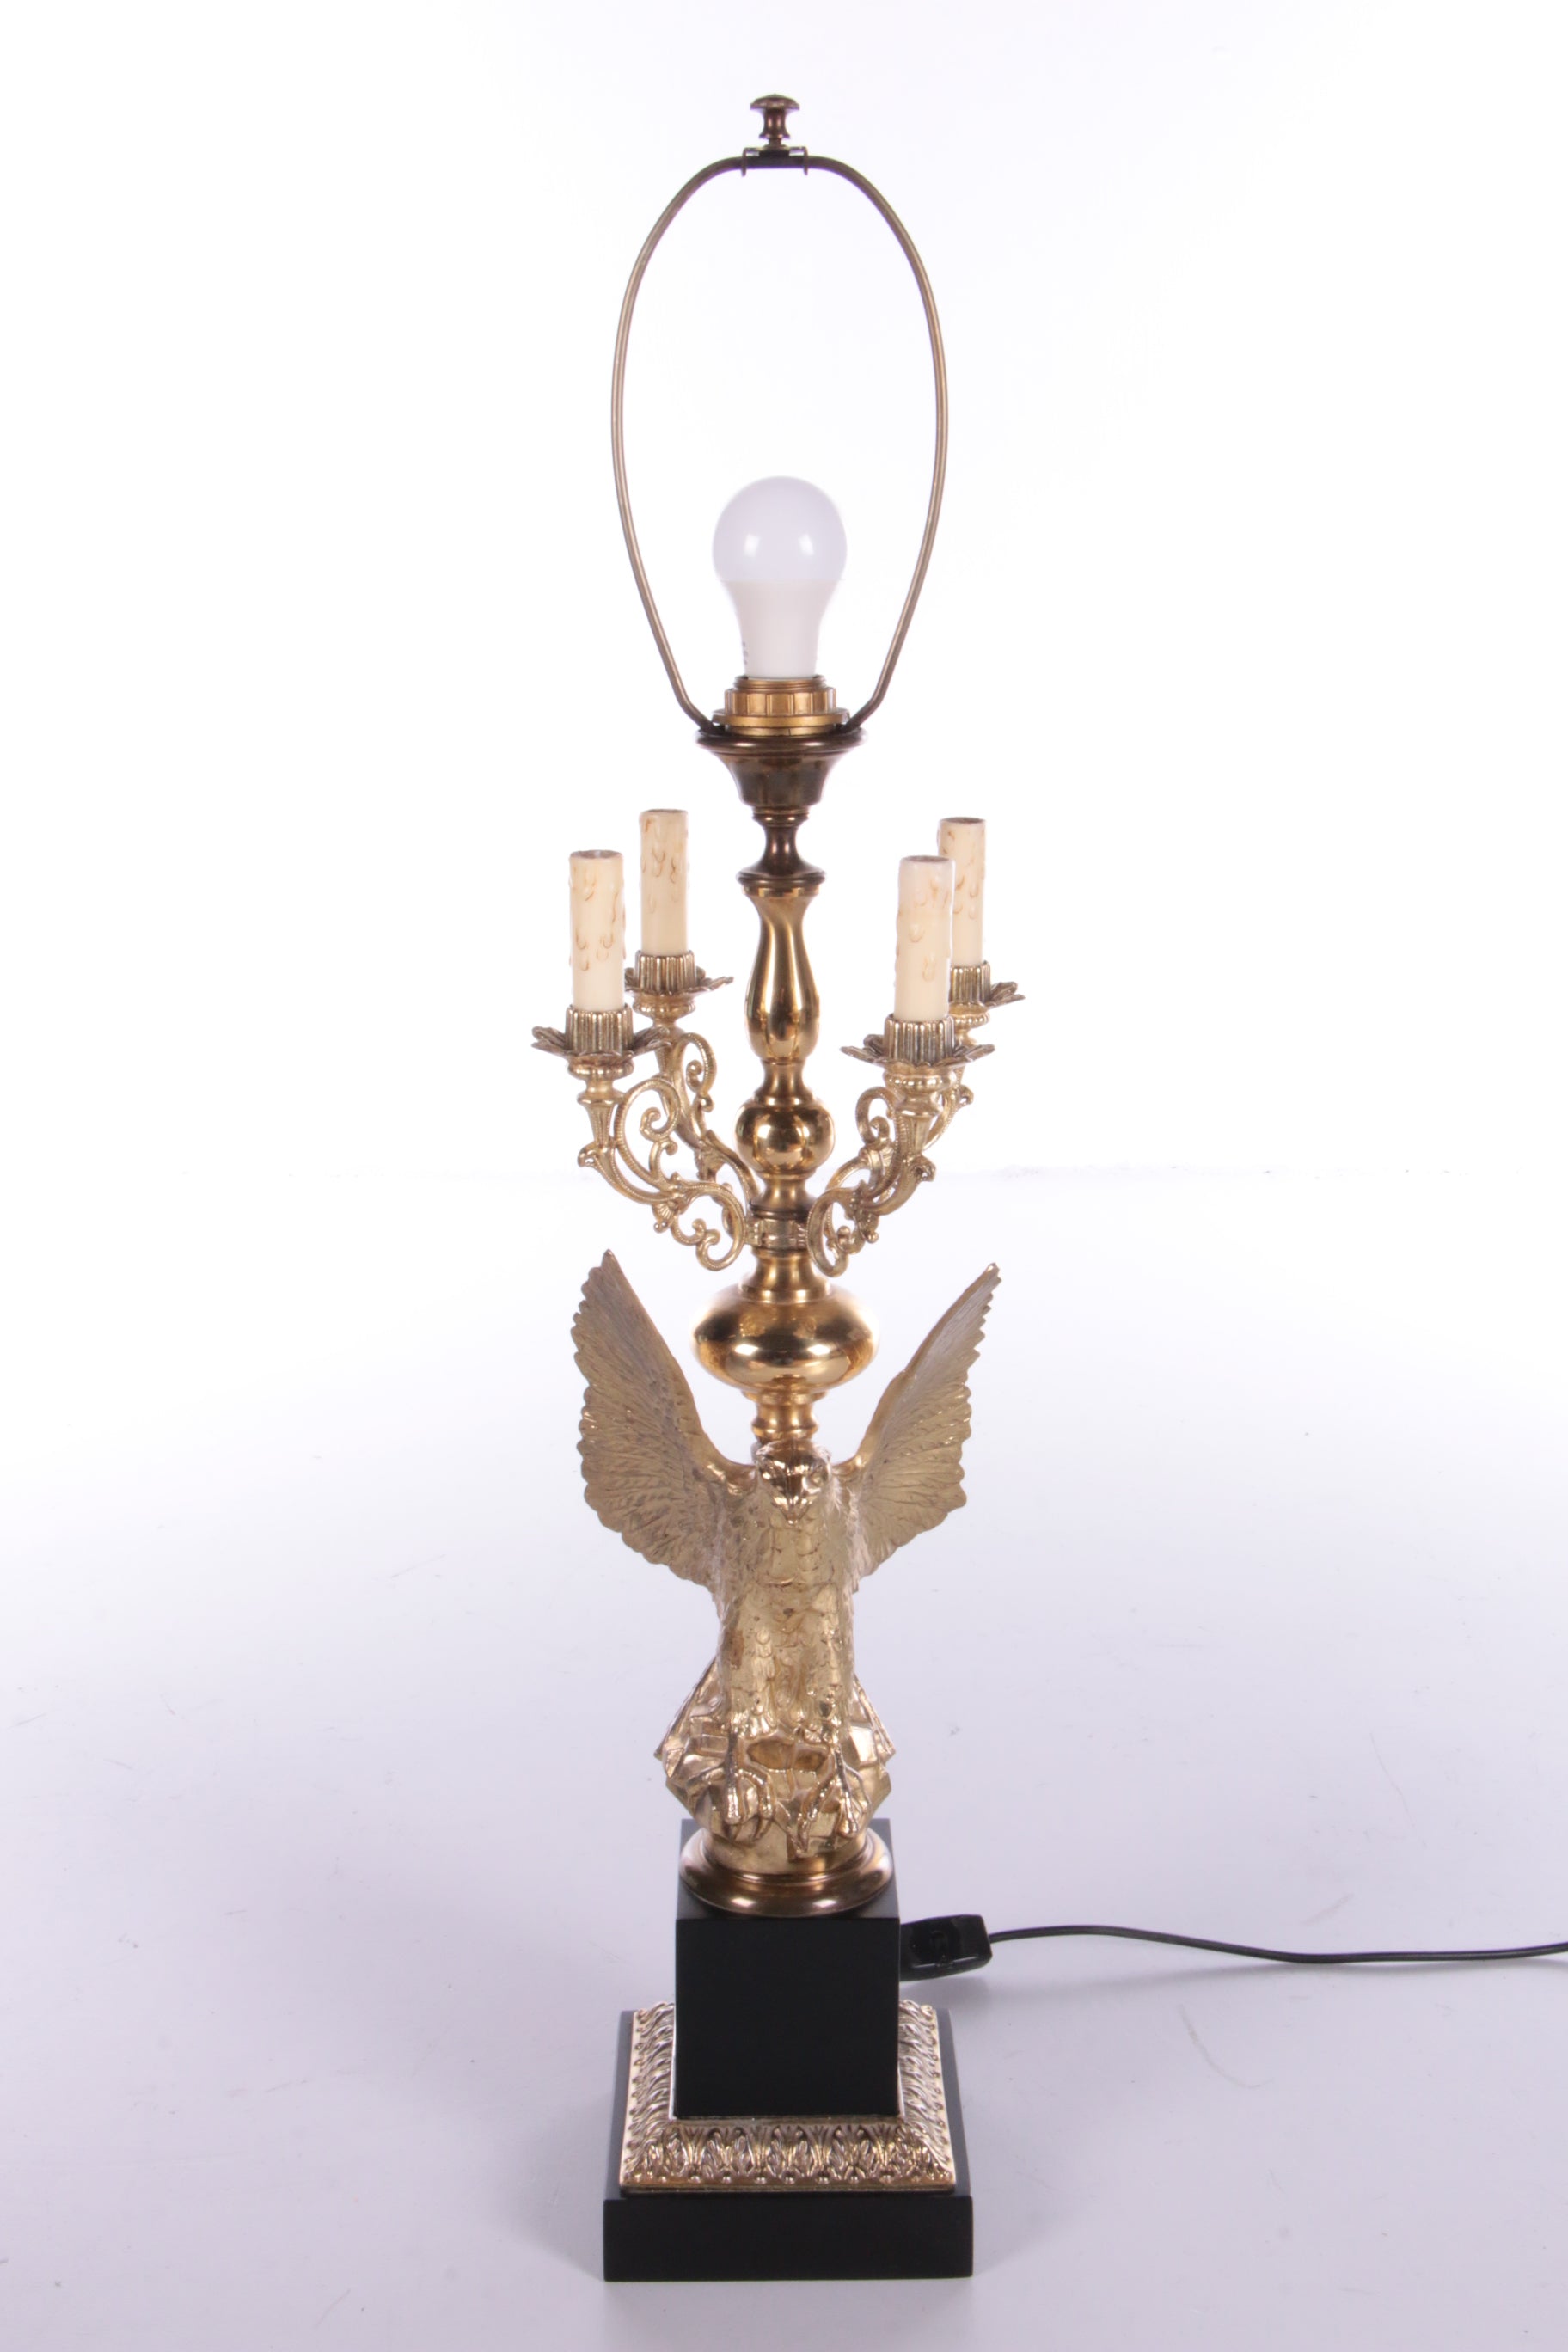 Jacques Charles voor Maison Charles - Eagle Guilded Table Lamp by Maison Charles